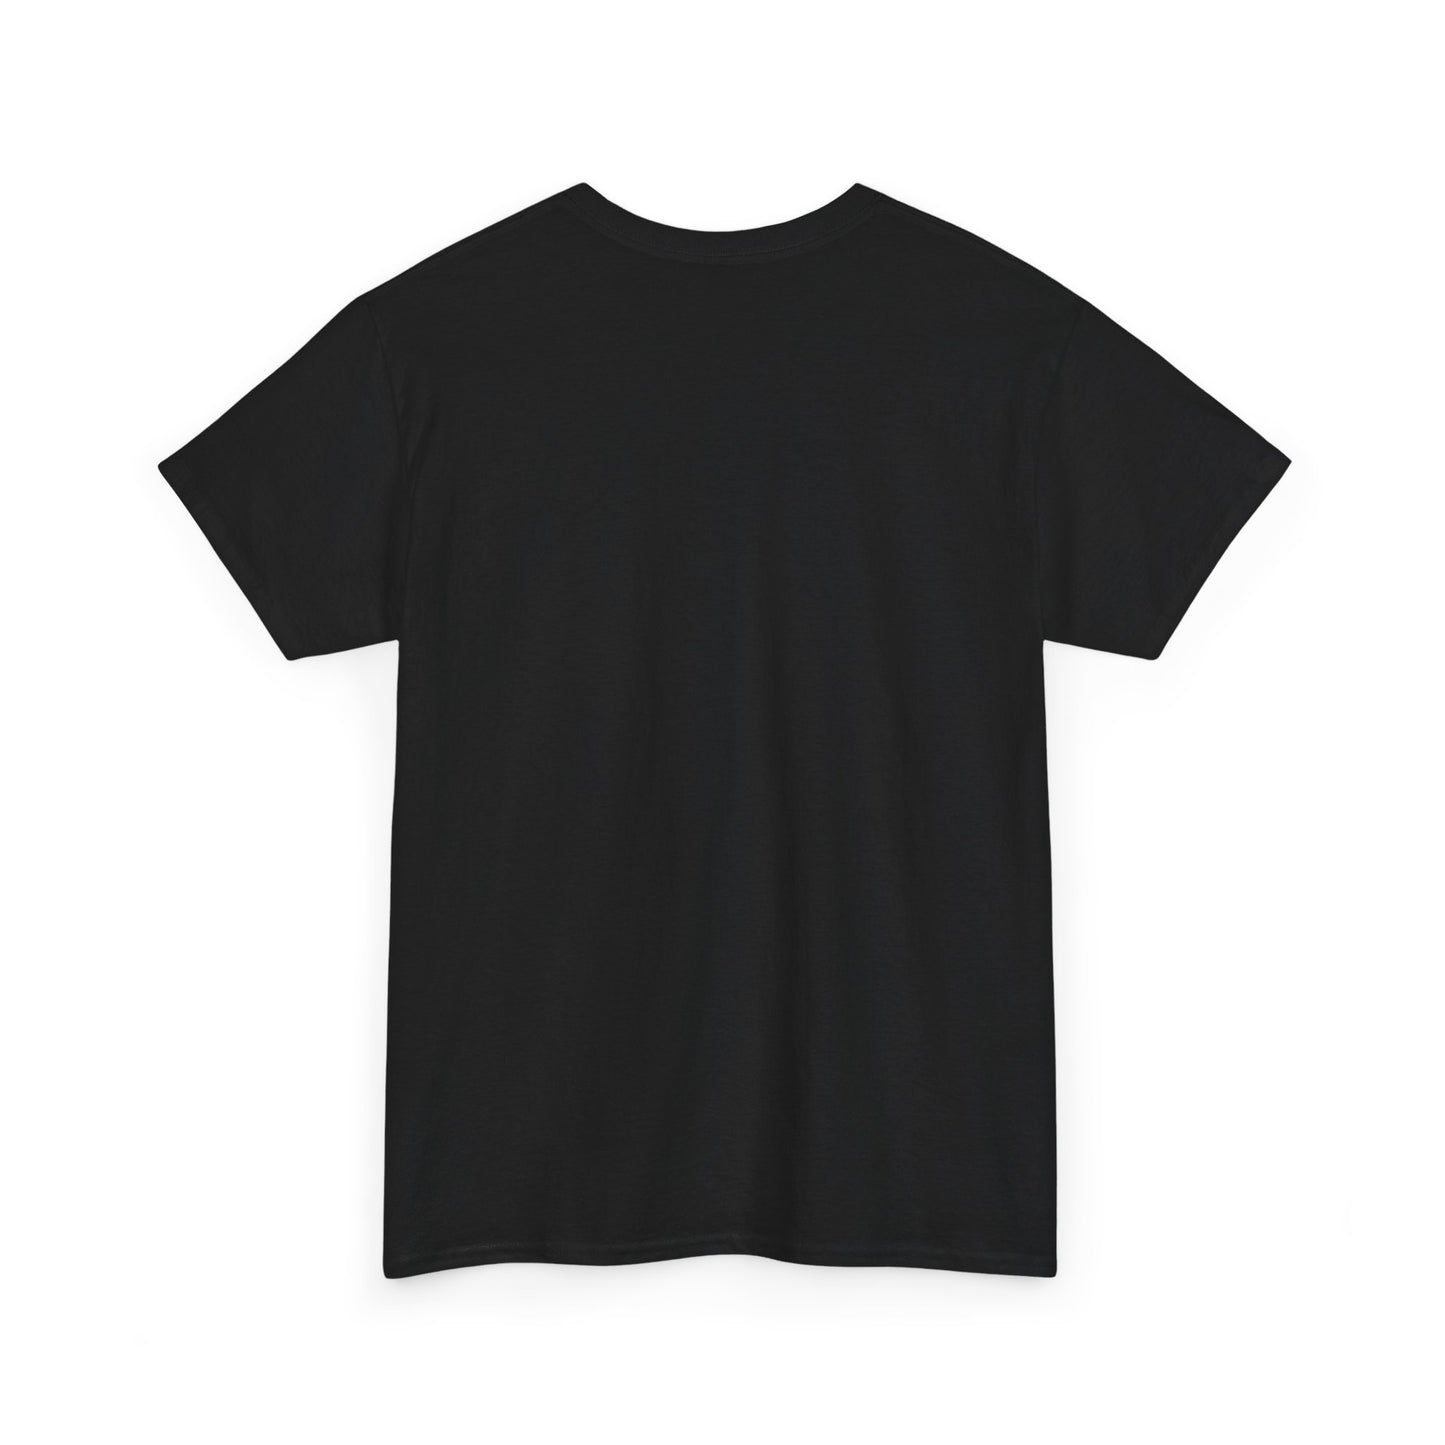 Tanned & Tipsy - Unisex Heavy Cotton Tee